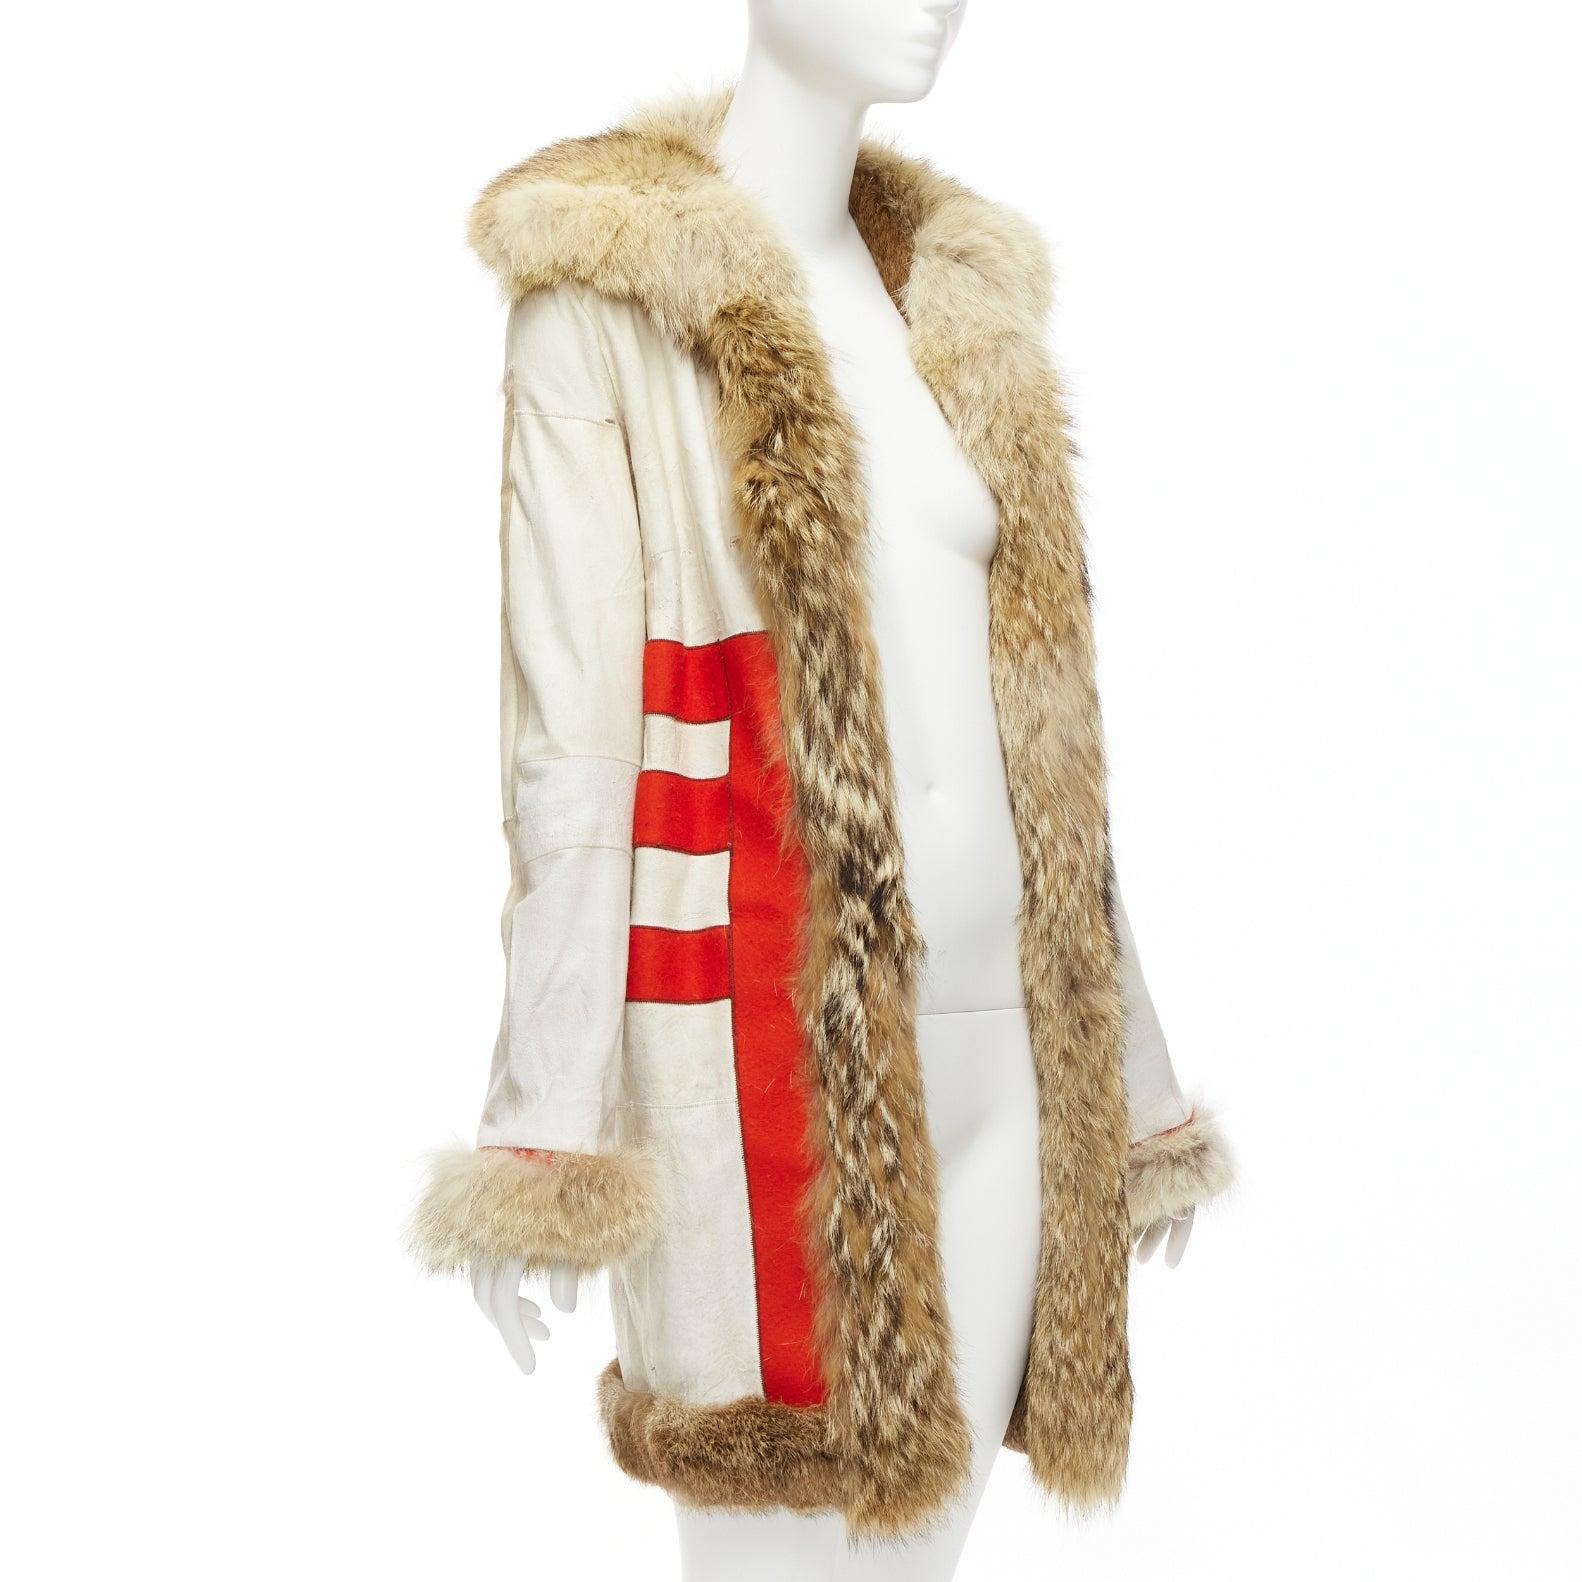 BALENCIAGA 2007 cream red 100% wool brown genuine fur lined longline coat FR36 S
Reference: NILI/A00007
Brand: Balenciaga
Designer: Nicolas Ghesquiere
Collection: 2007 Fall
Material: Fur, Wool
Color: Brown, Red
Pattern: Solid
Closure: Hook &